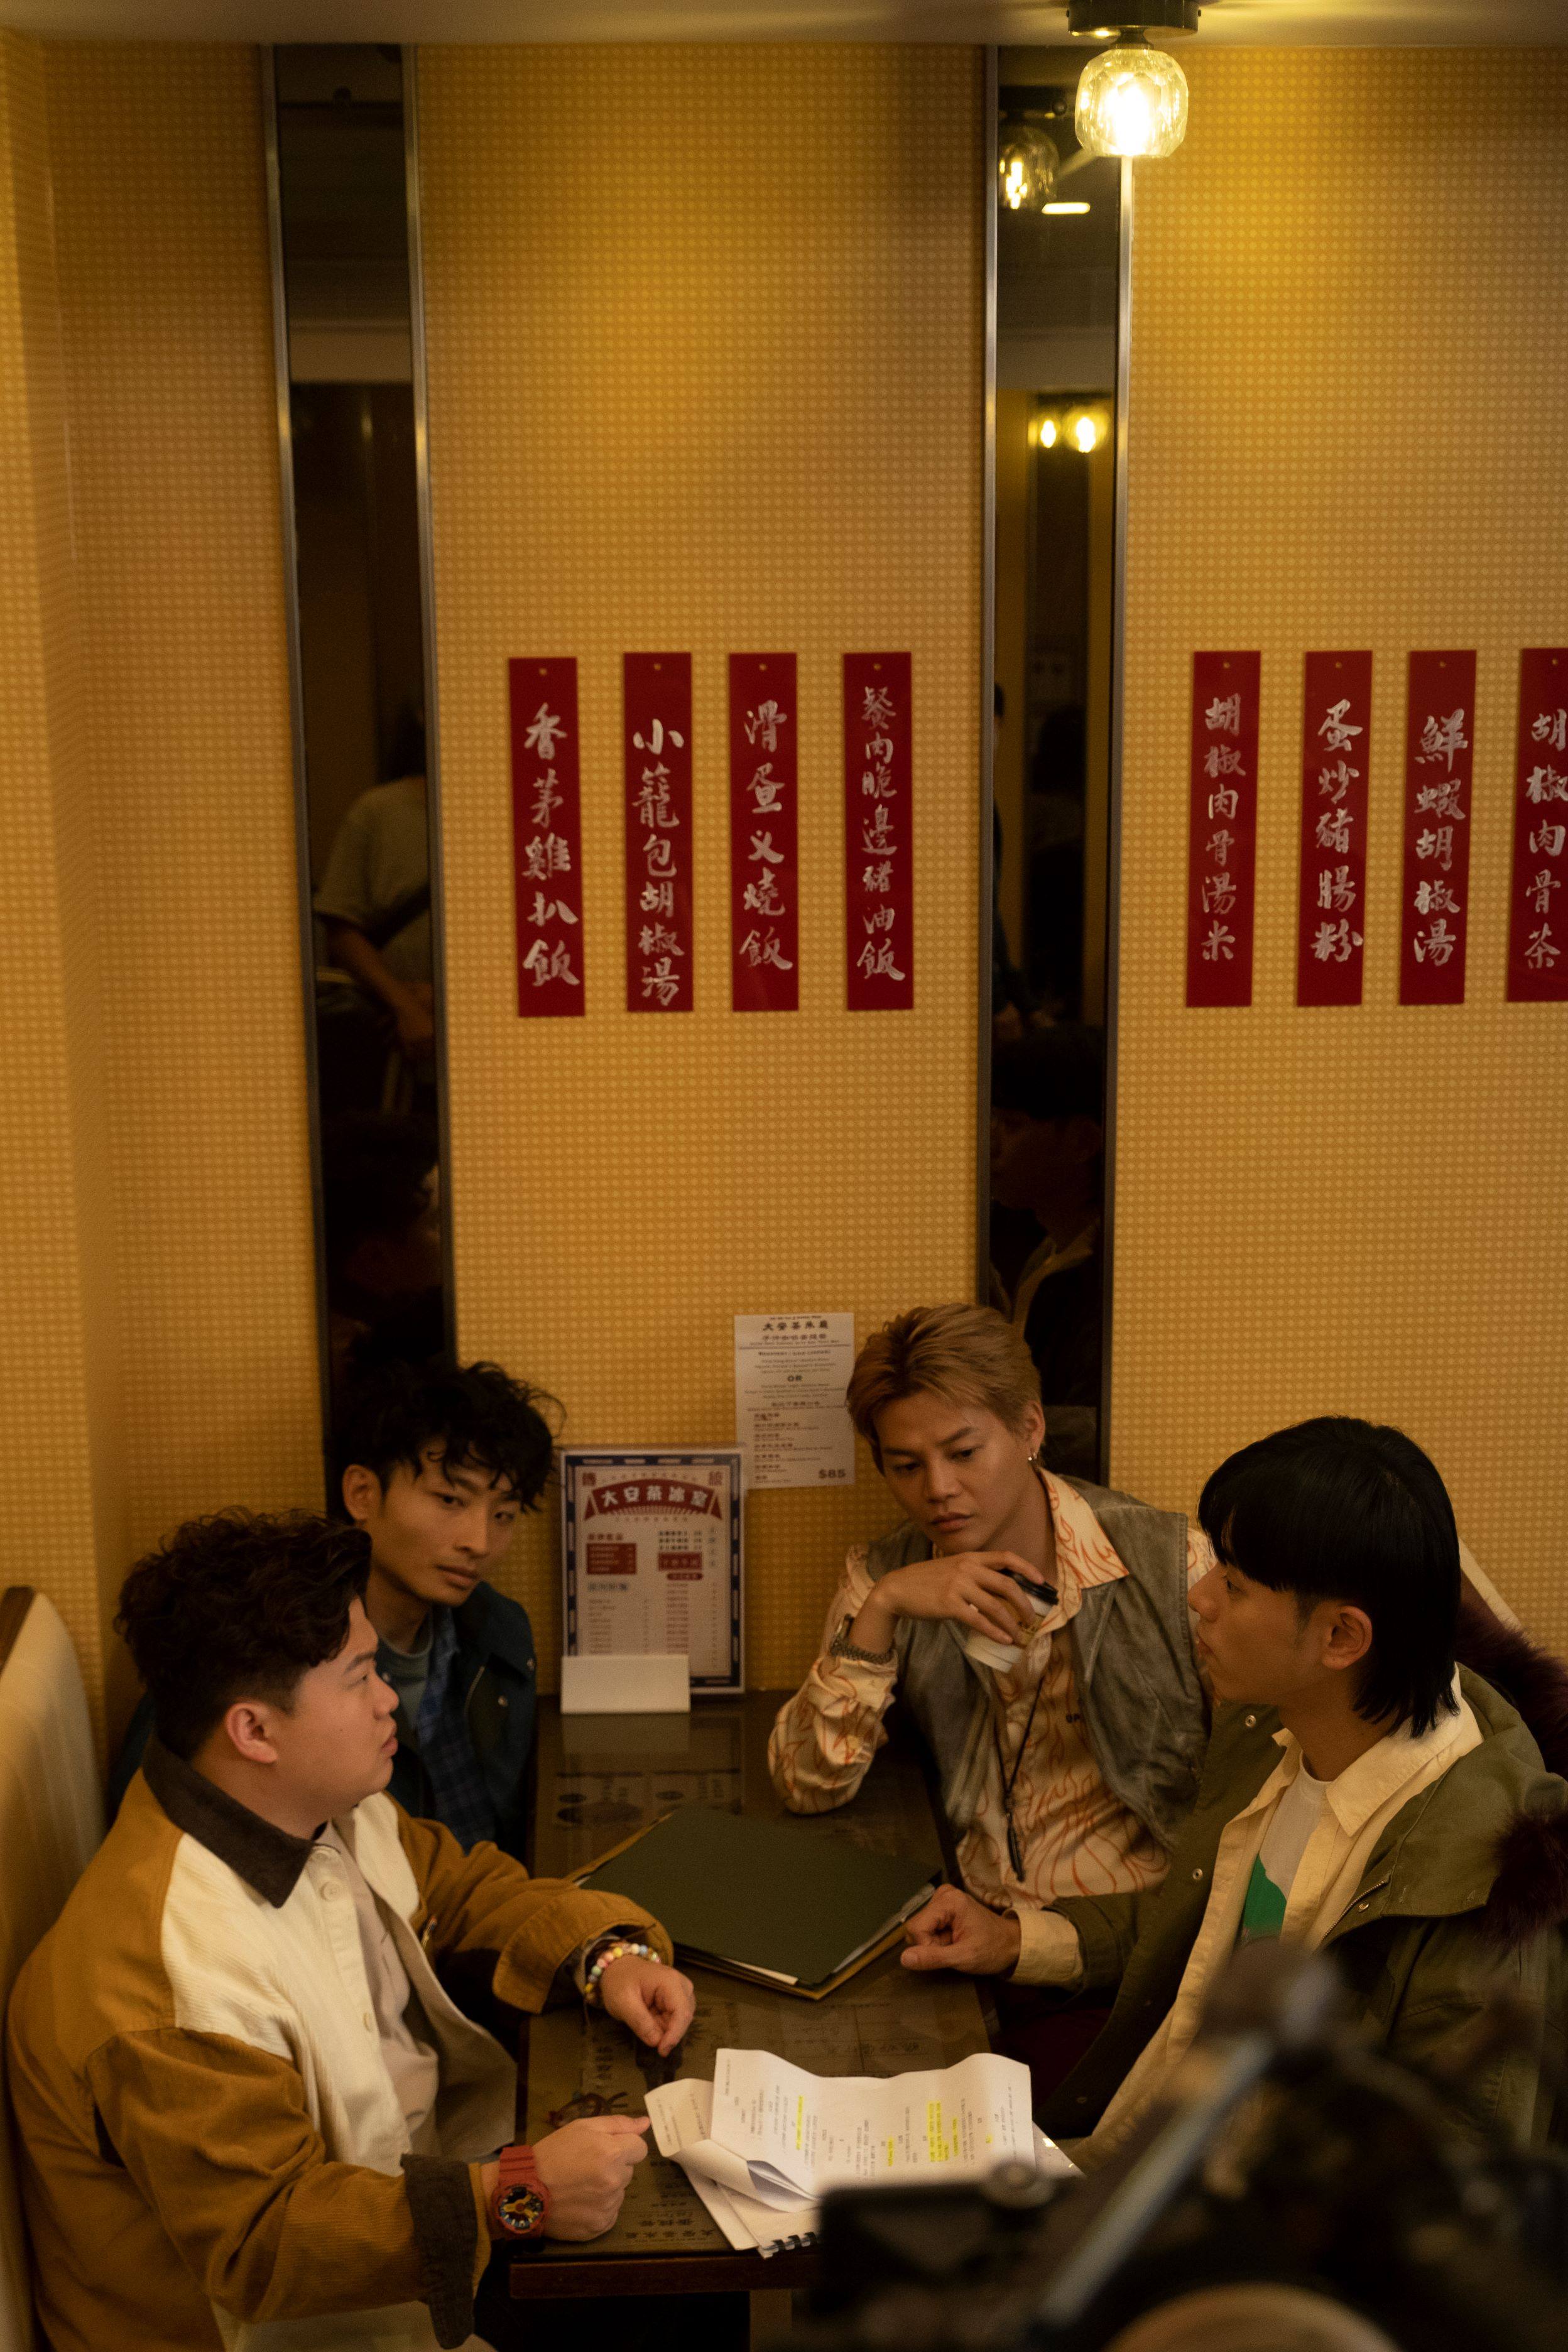 (From left) Leung Yip, Dee Ho, Ng Po-ki and Denis Kwok in a still from “Yum Investigation”.